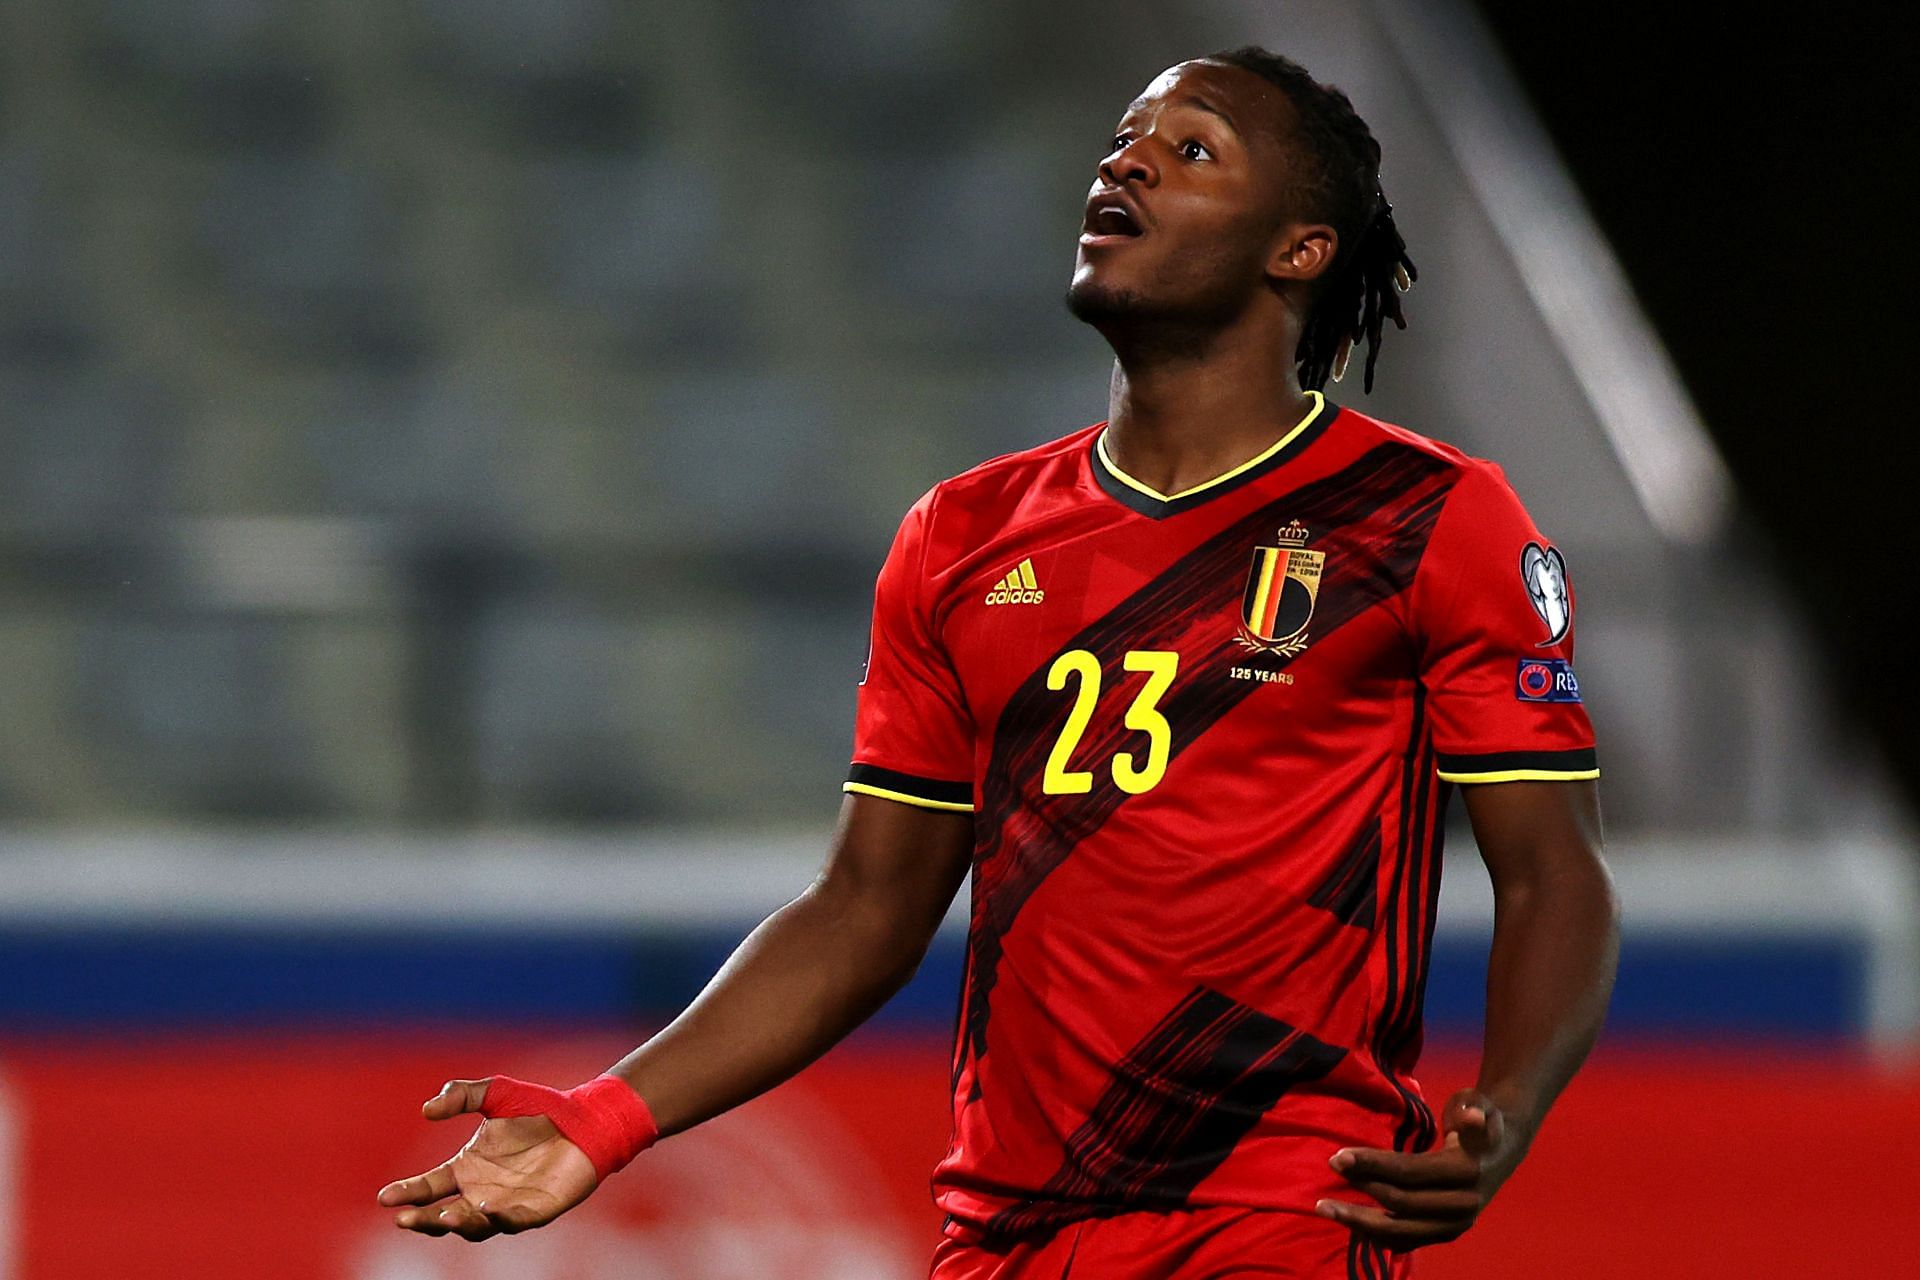 Michy Batshuayi has prove his mettle at club and international level